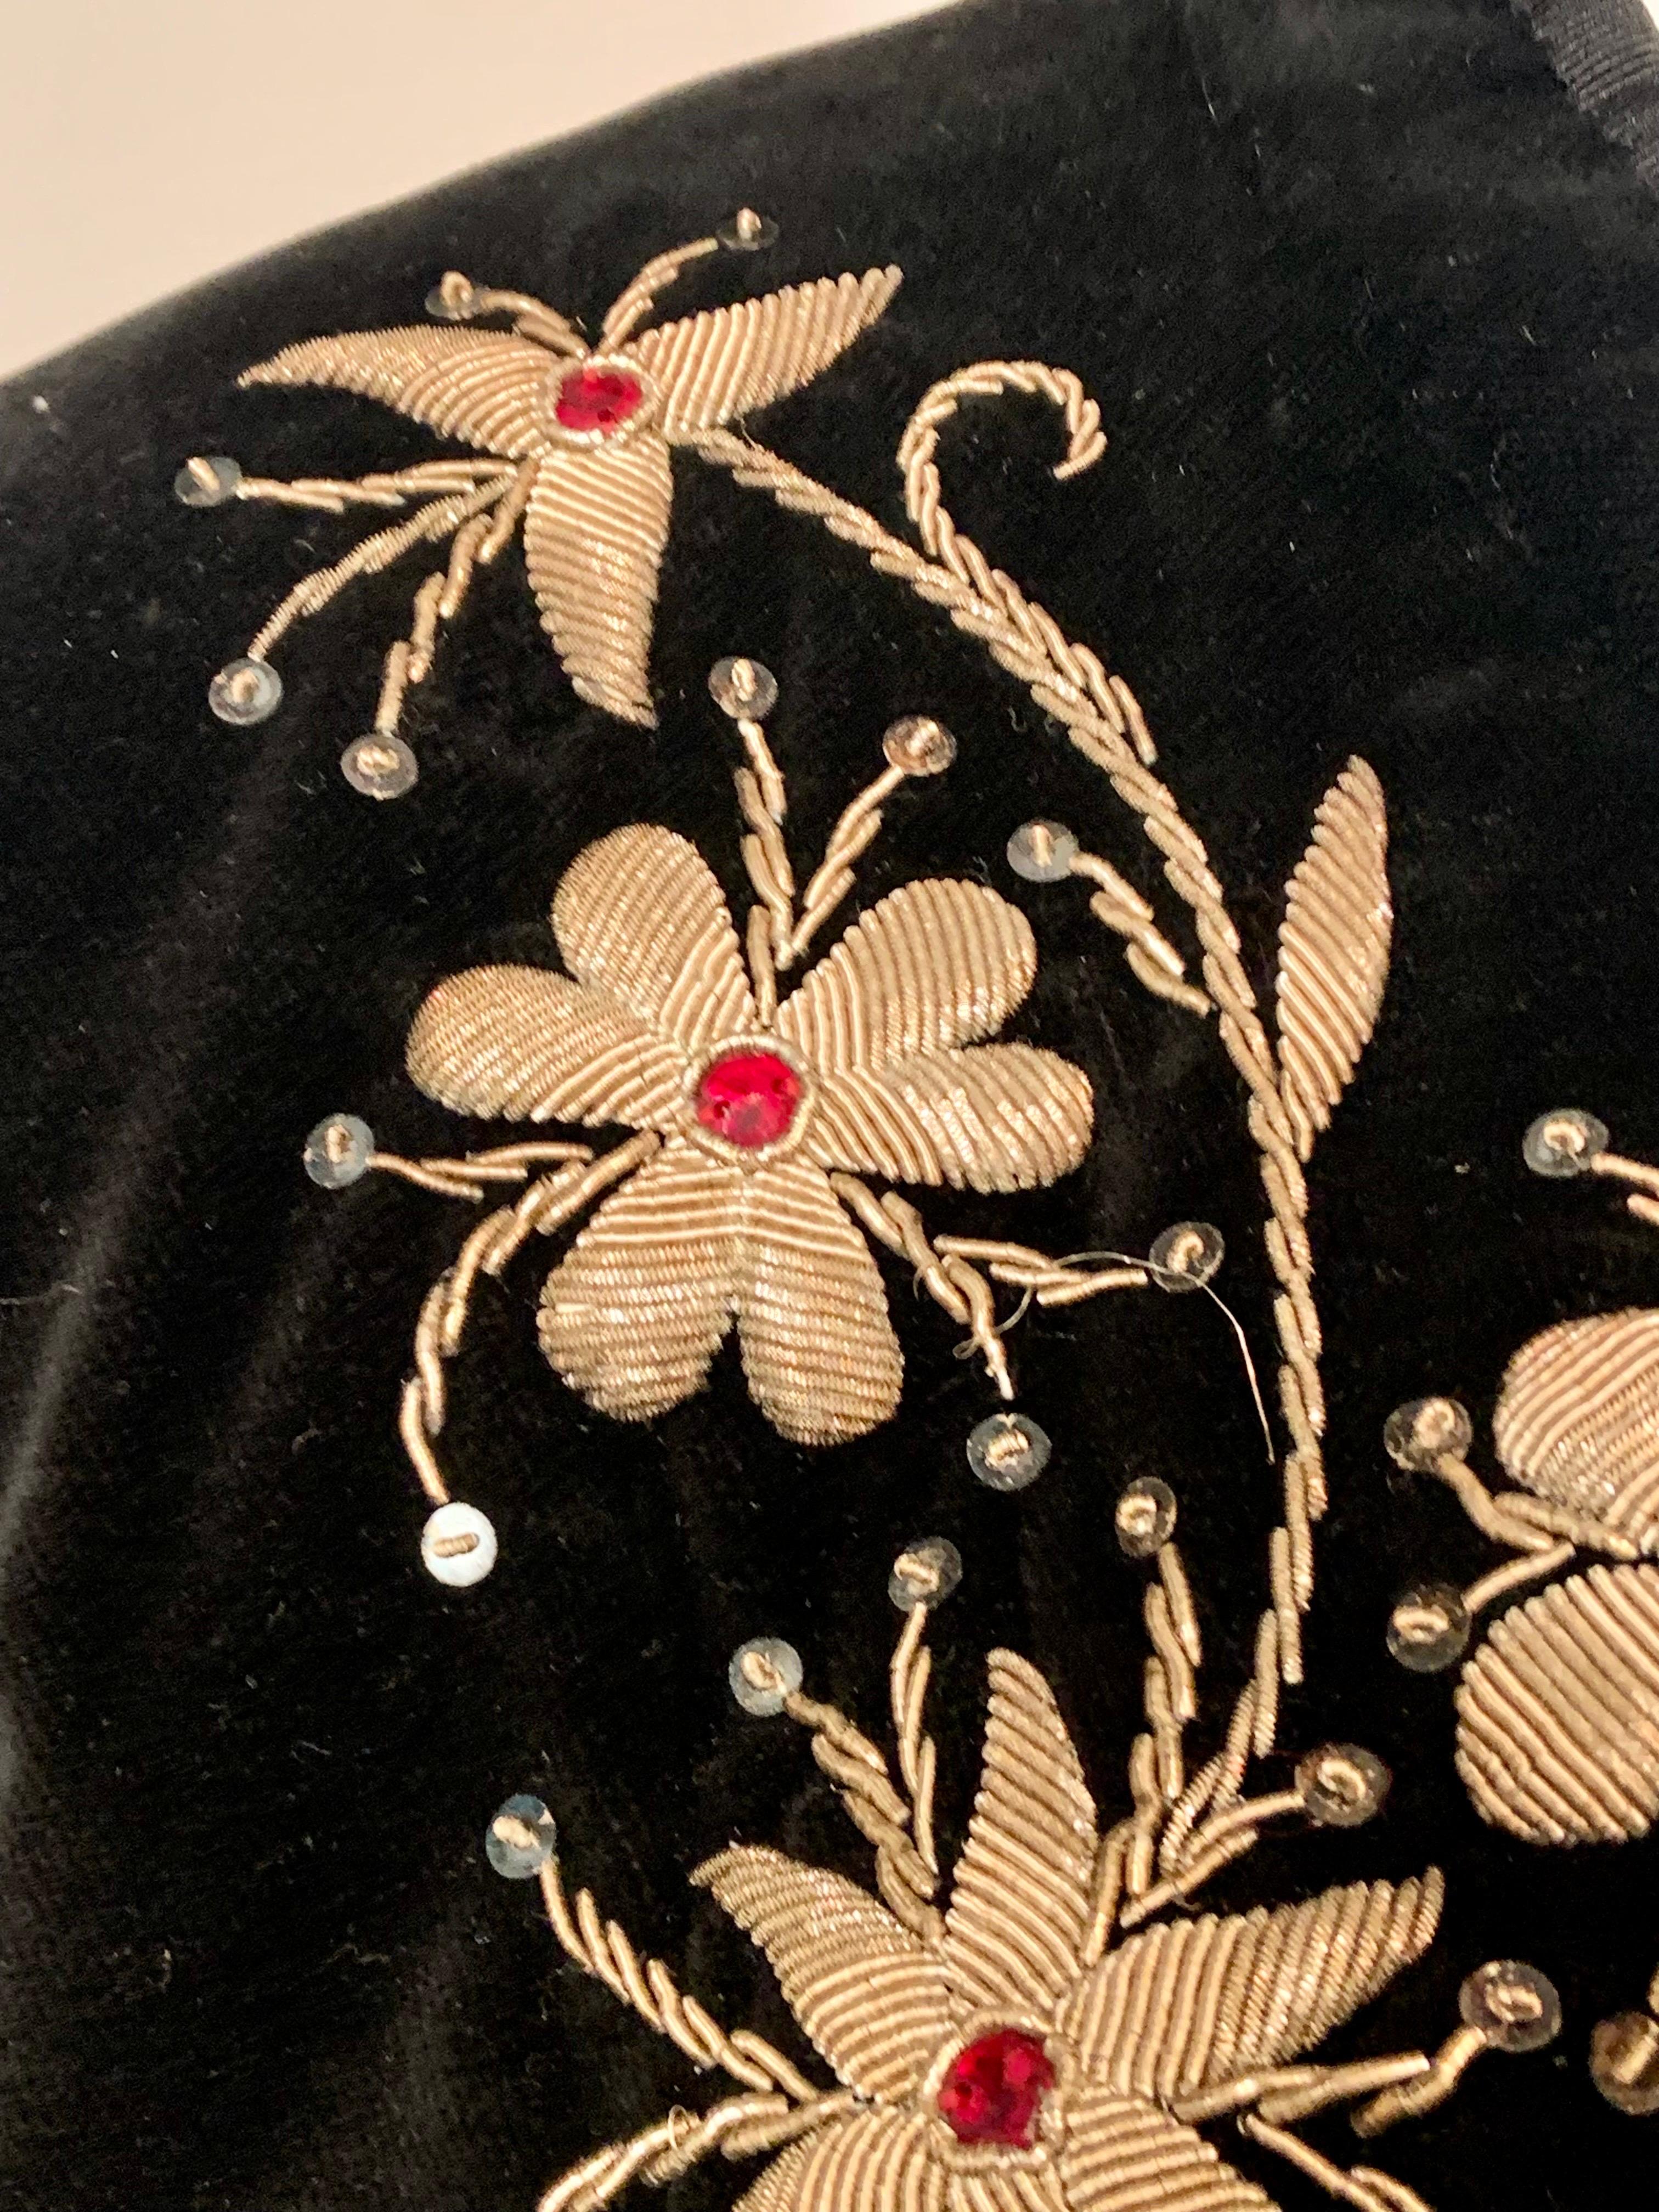 Spanish Made Black Velvet Bolero Jacket with Gold Bullion Embroidery In Excellent Condition For Sale In New Hope, PA